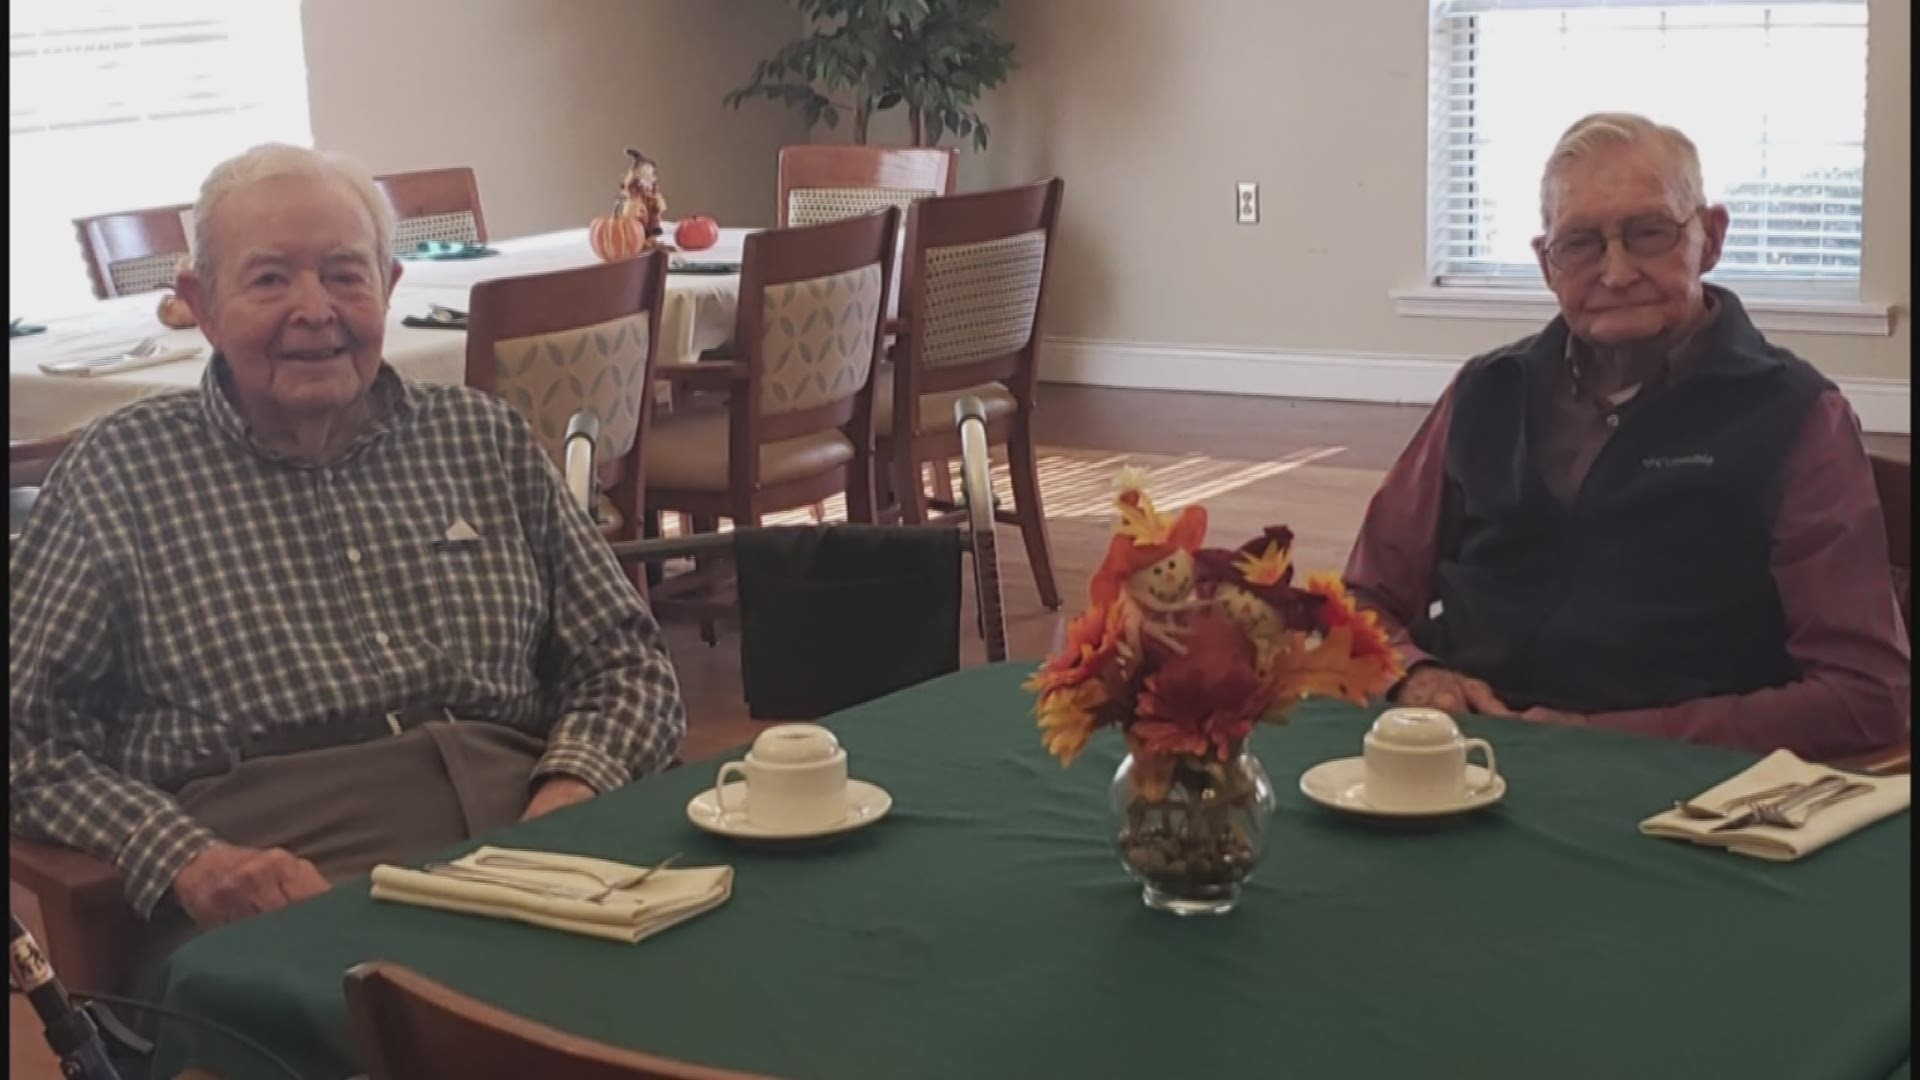 Two veterans who both served in the Pacific met in an assisted living facility of all places. Now they regularly have lunch together.